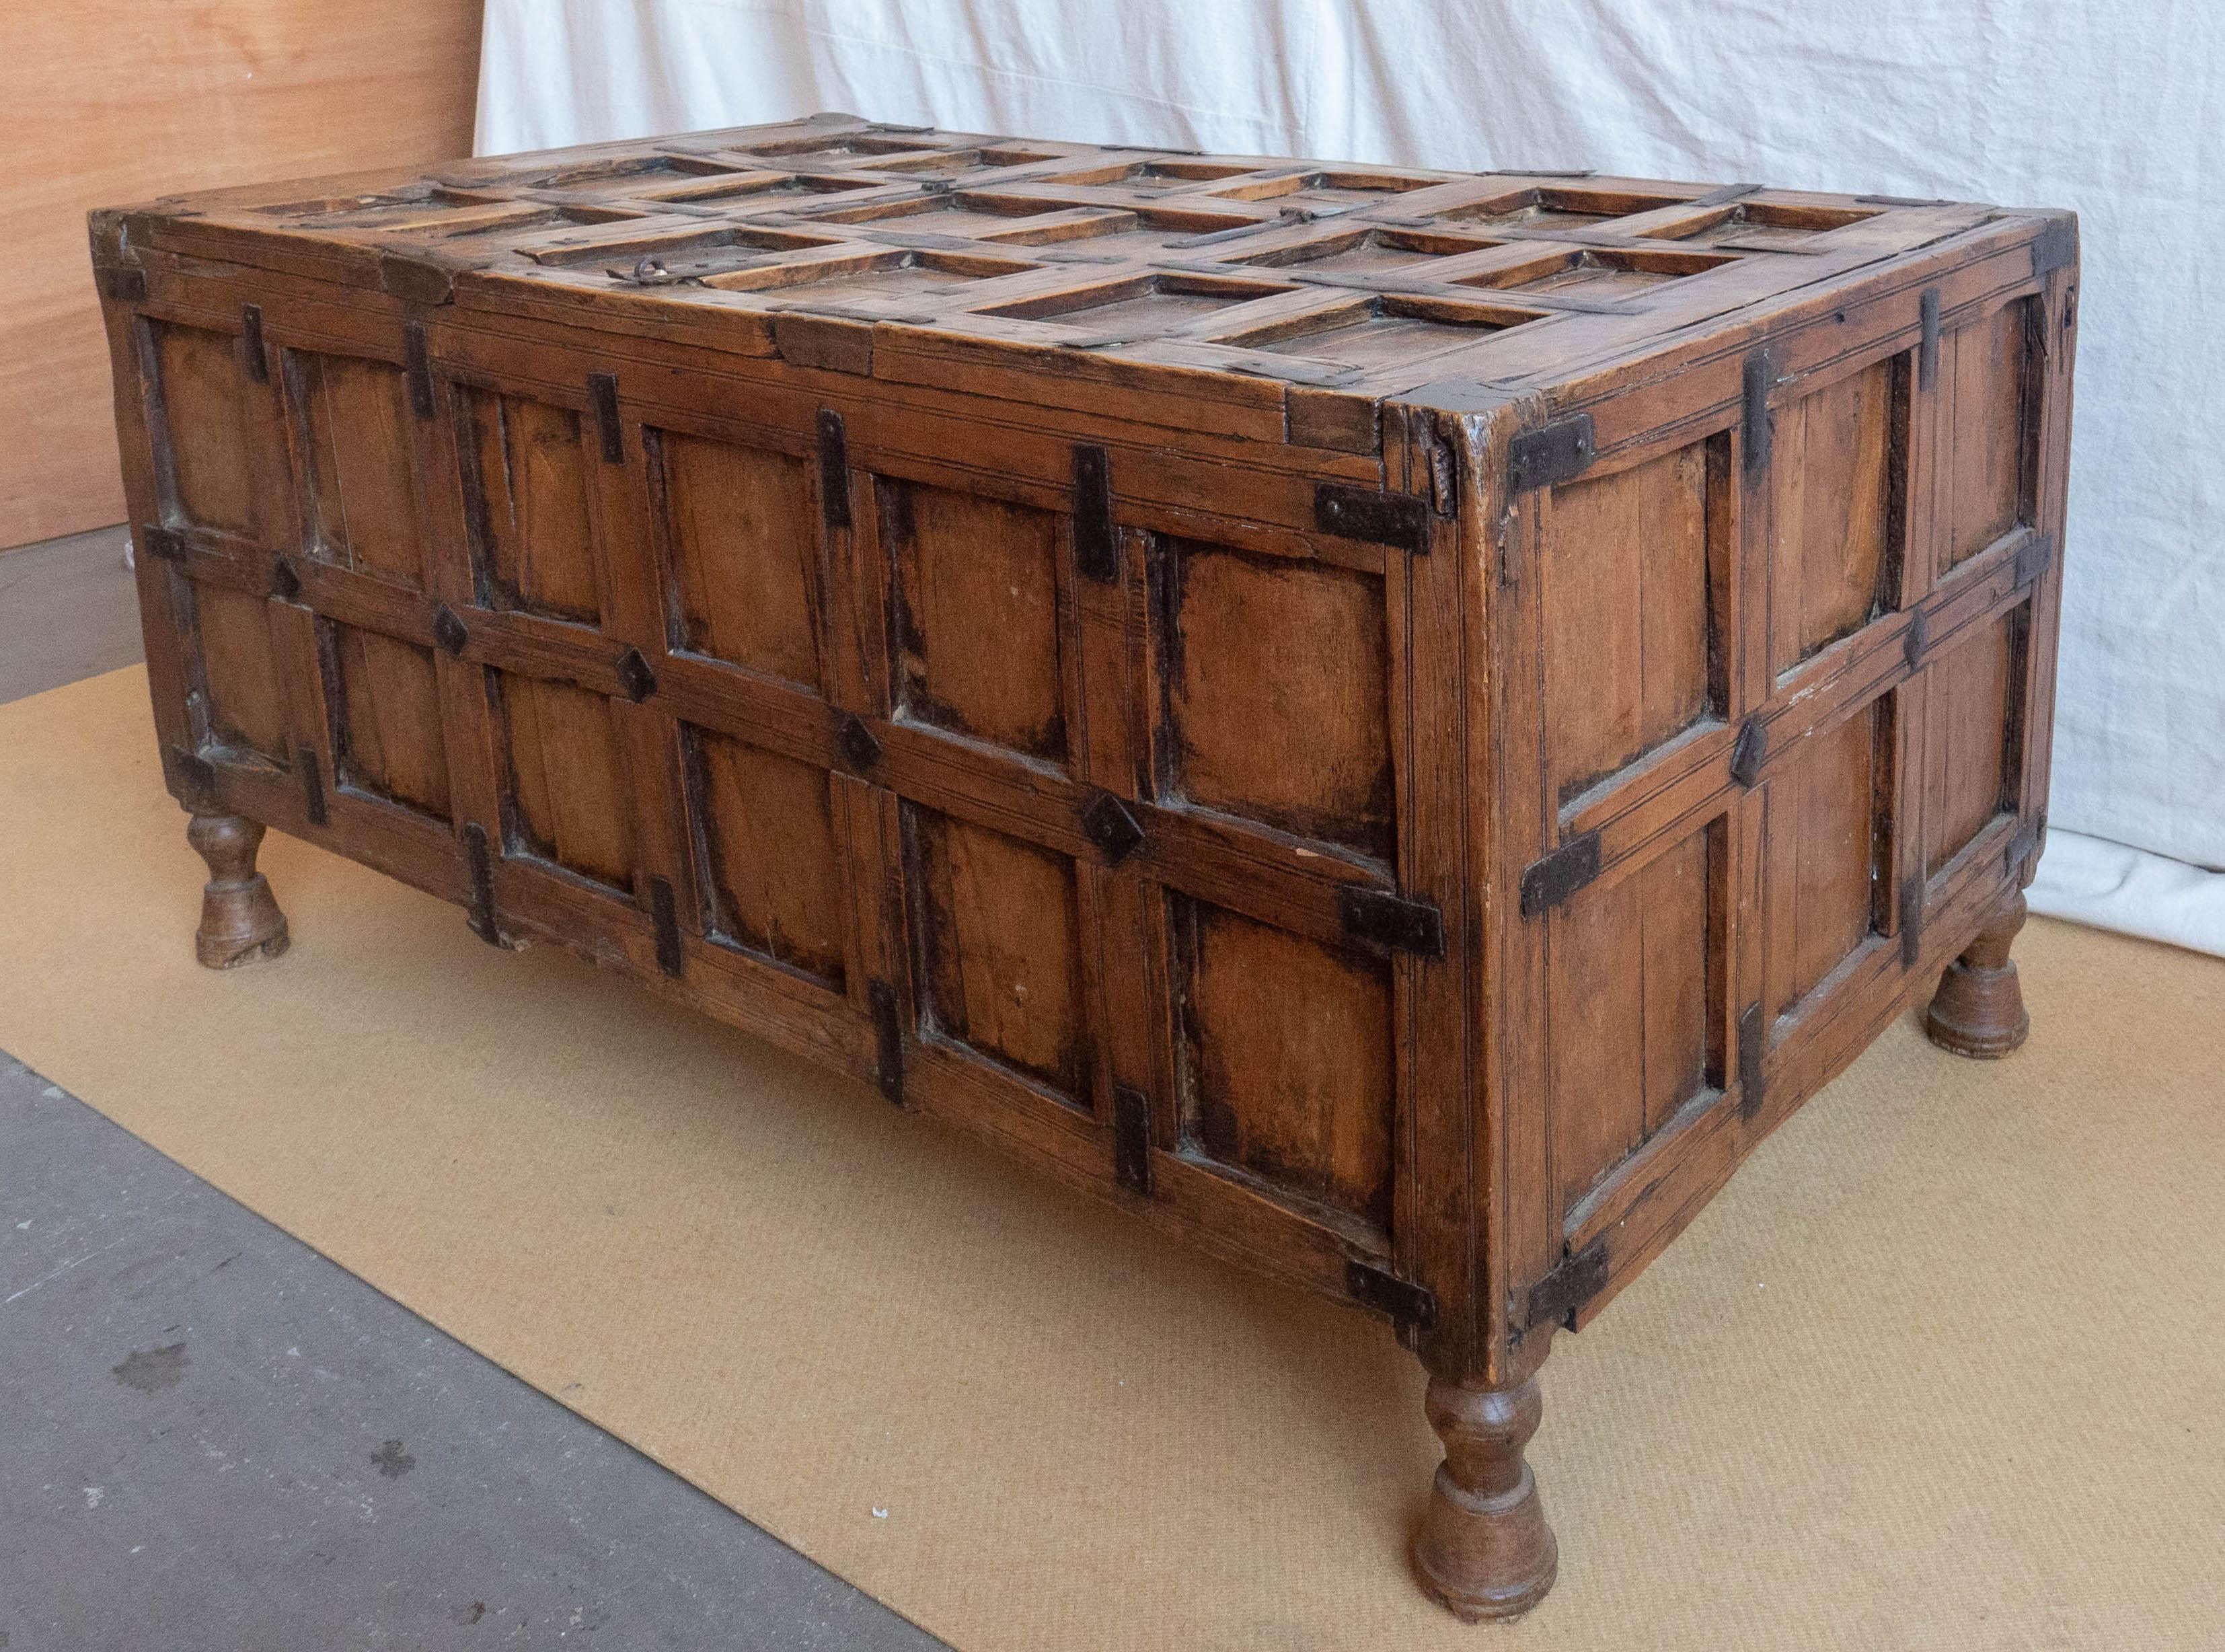 Early 19th century coffer or trunk. Crafted from fruitwood with panels and iron banding strips/accents throughout. Top with hinged flap for interior access. On turned and incised bell form feet.